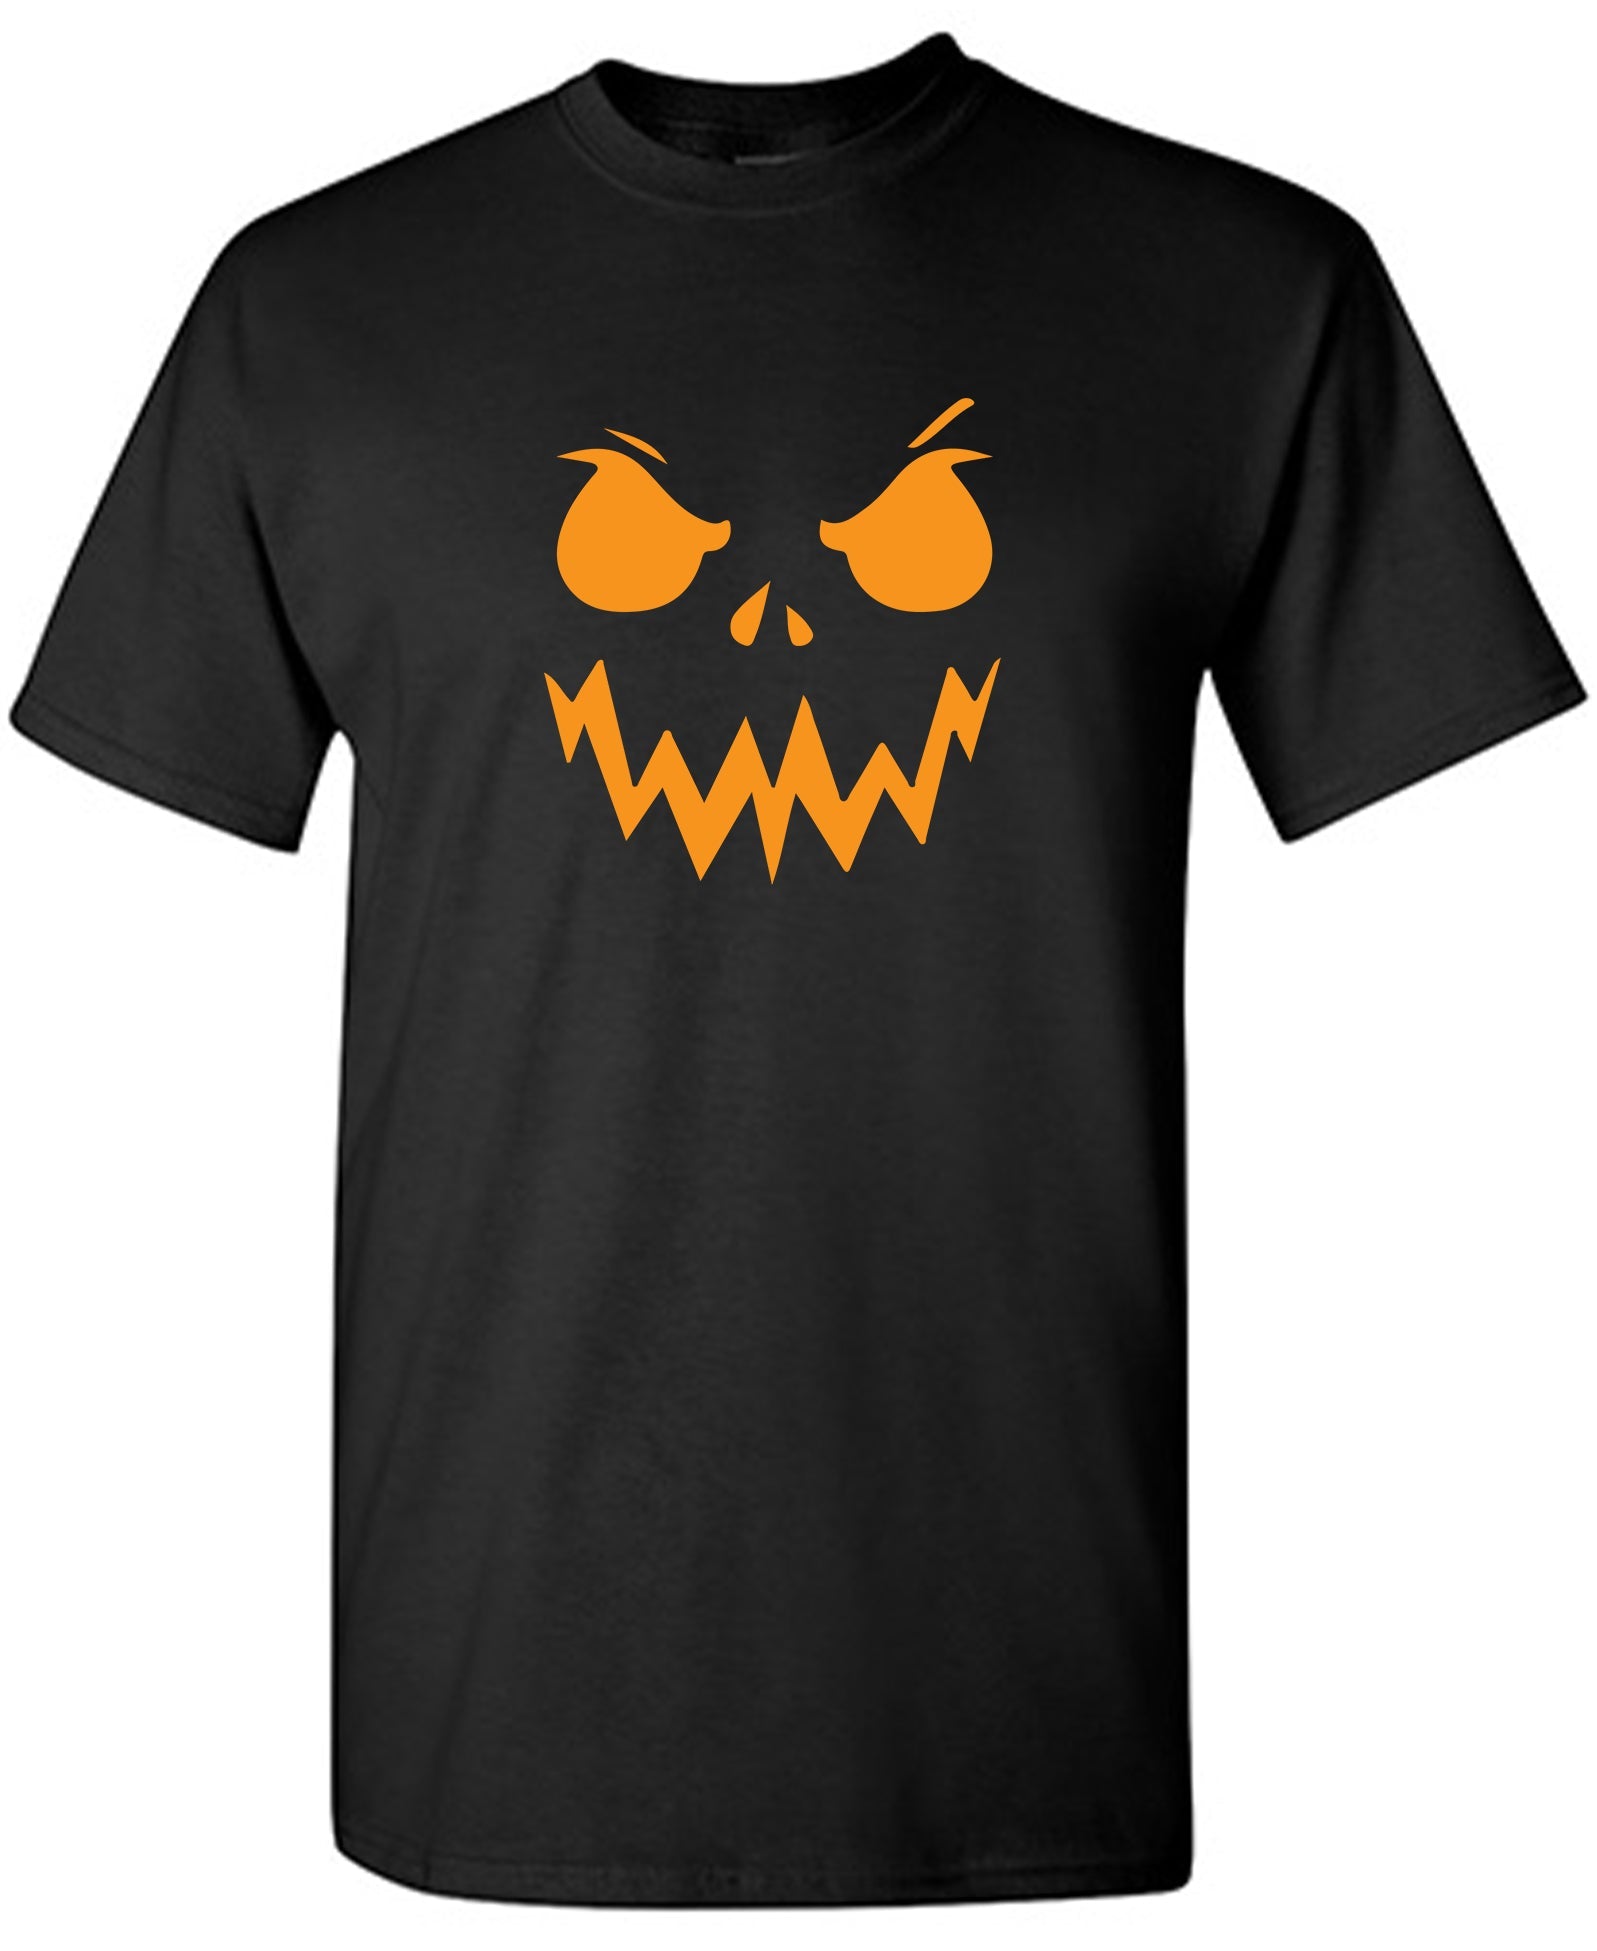 Mean Pumpkin Tee - Funny Graphic T Shirts